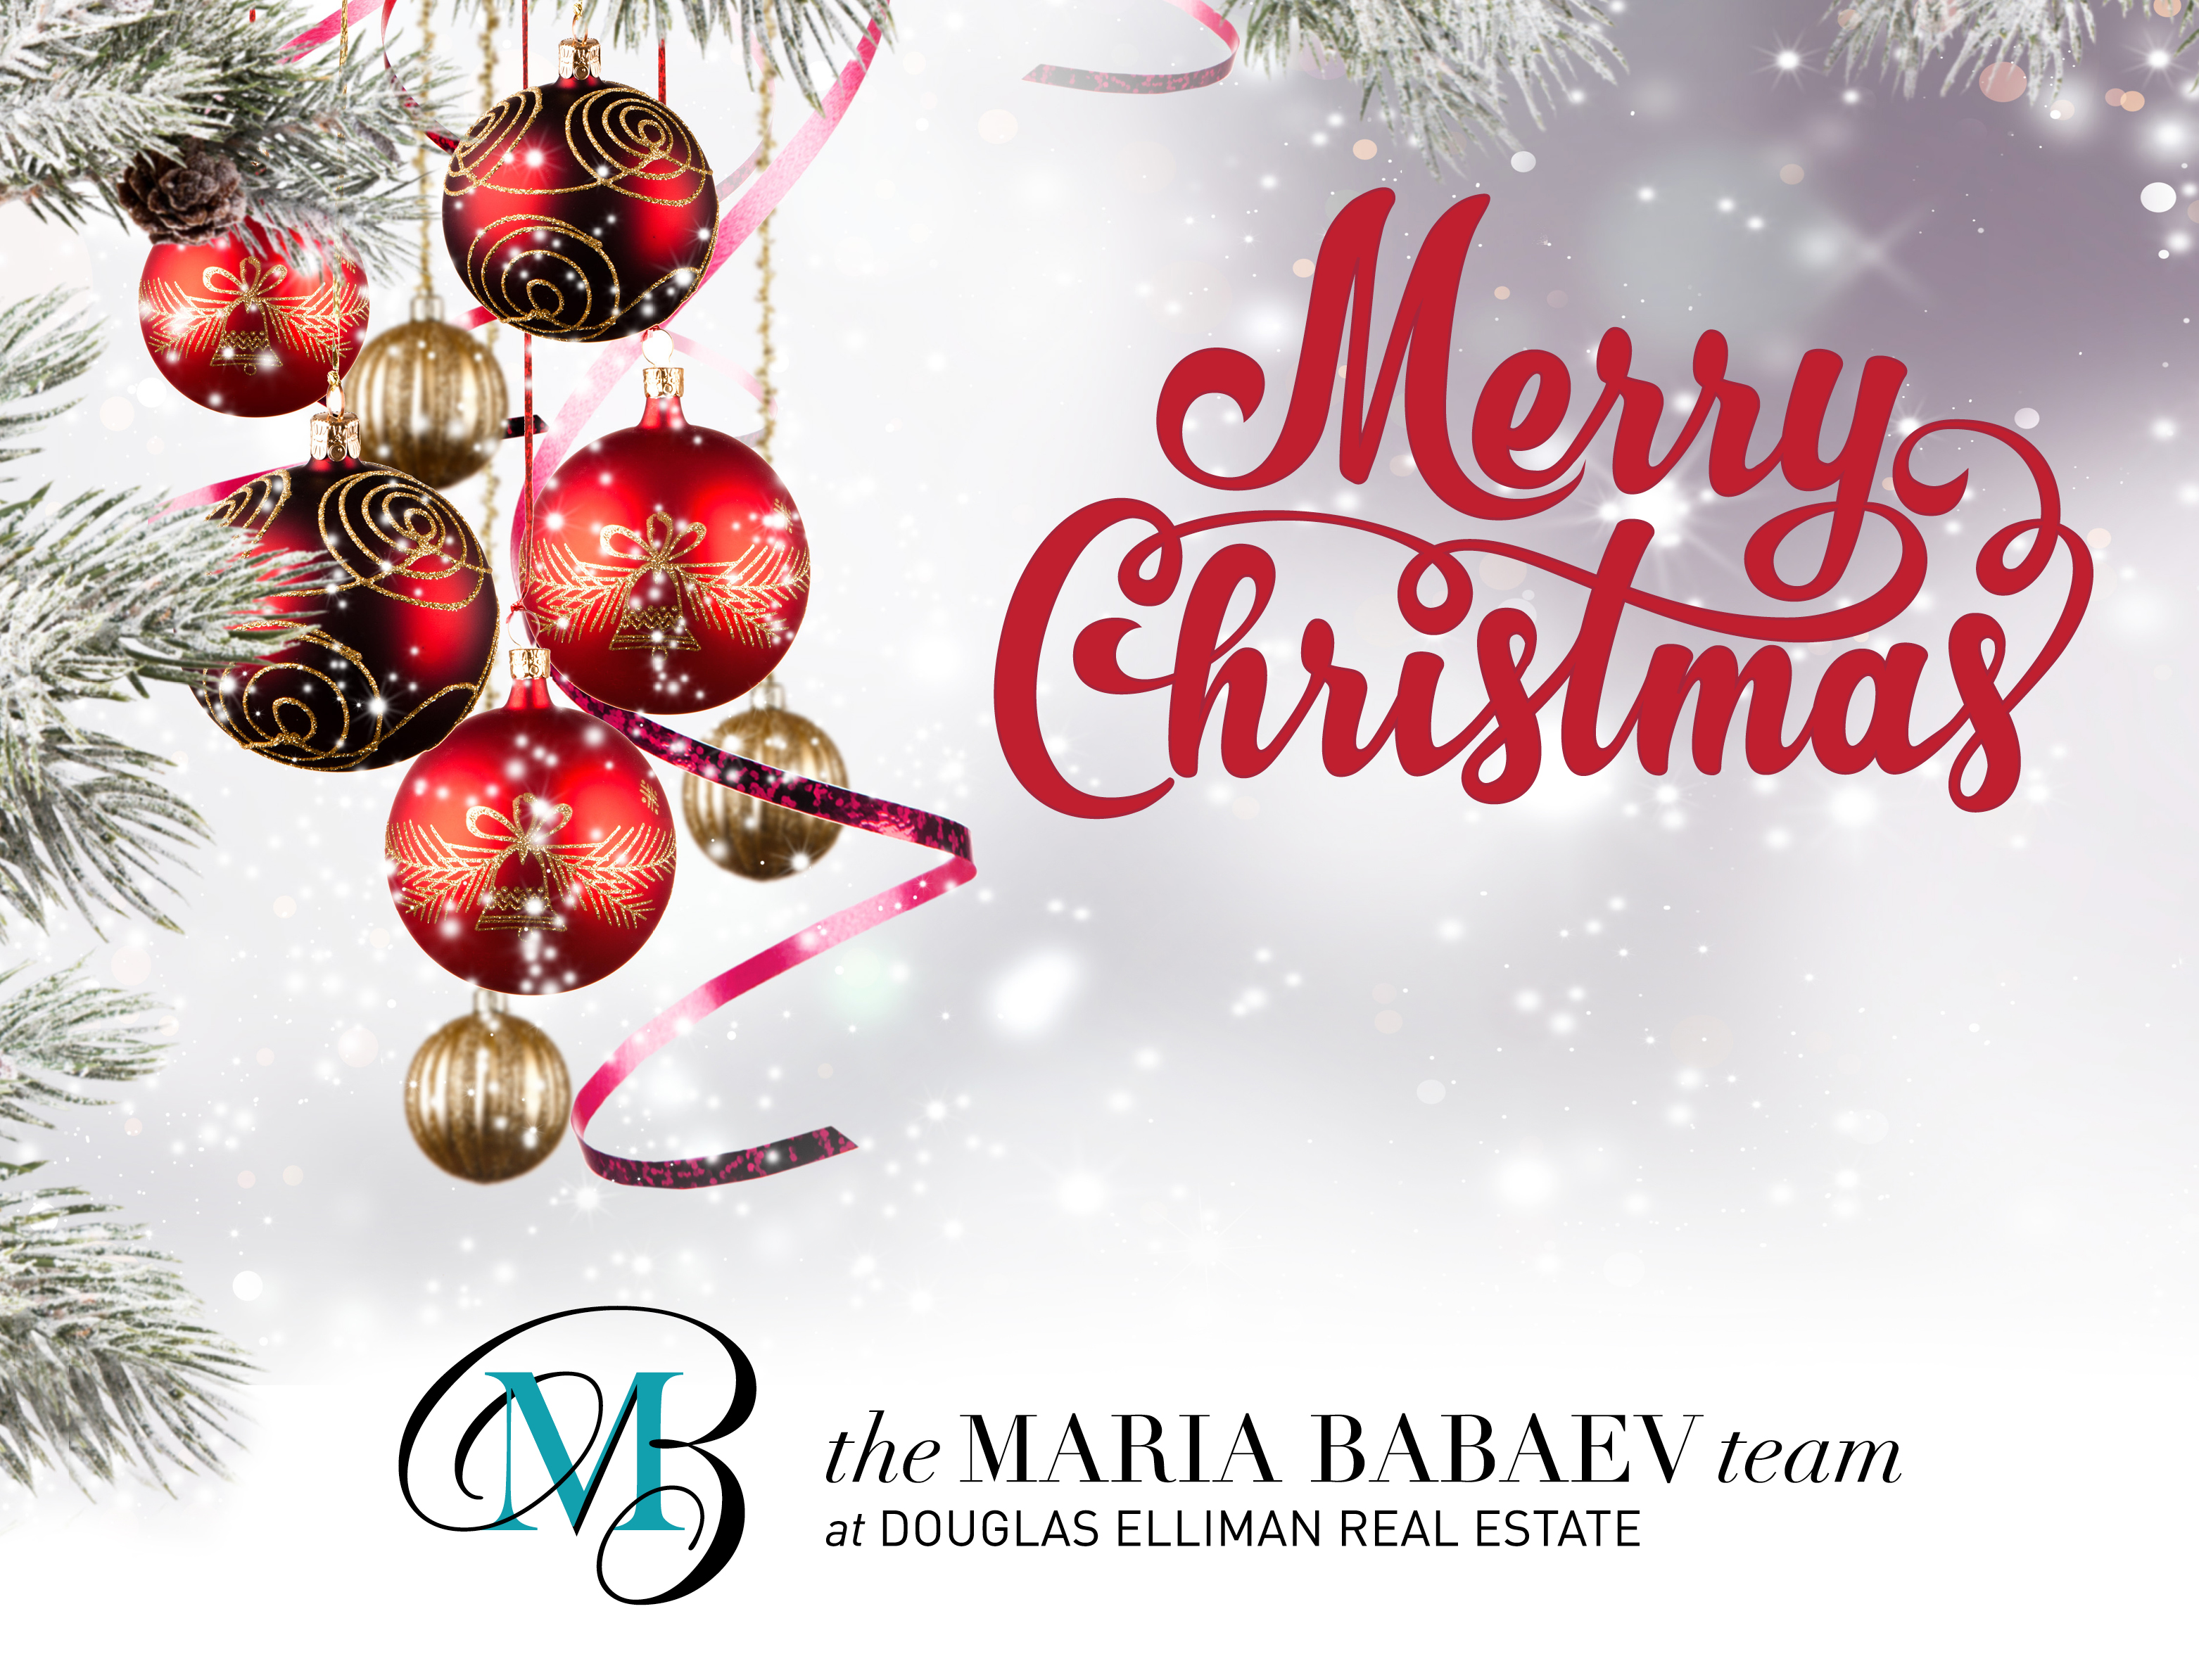 Merry Christmas From The Maria Babaev Team!